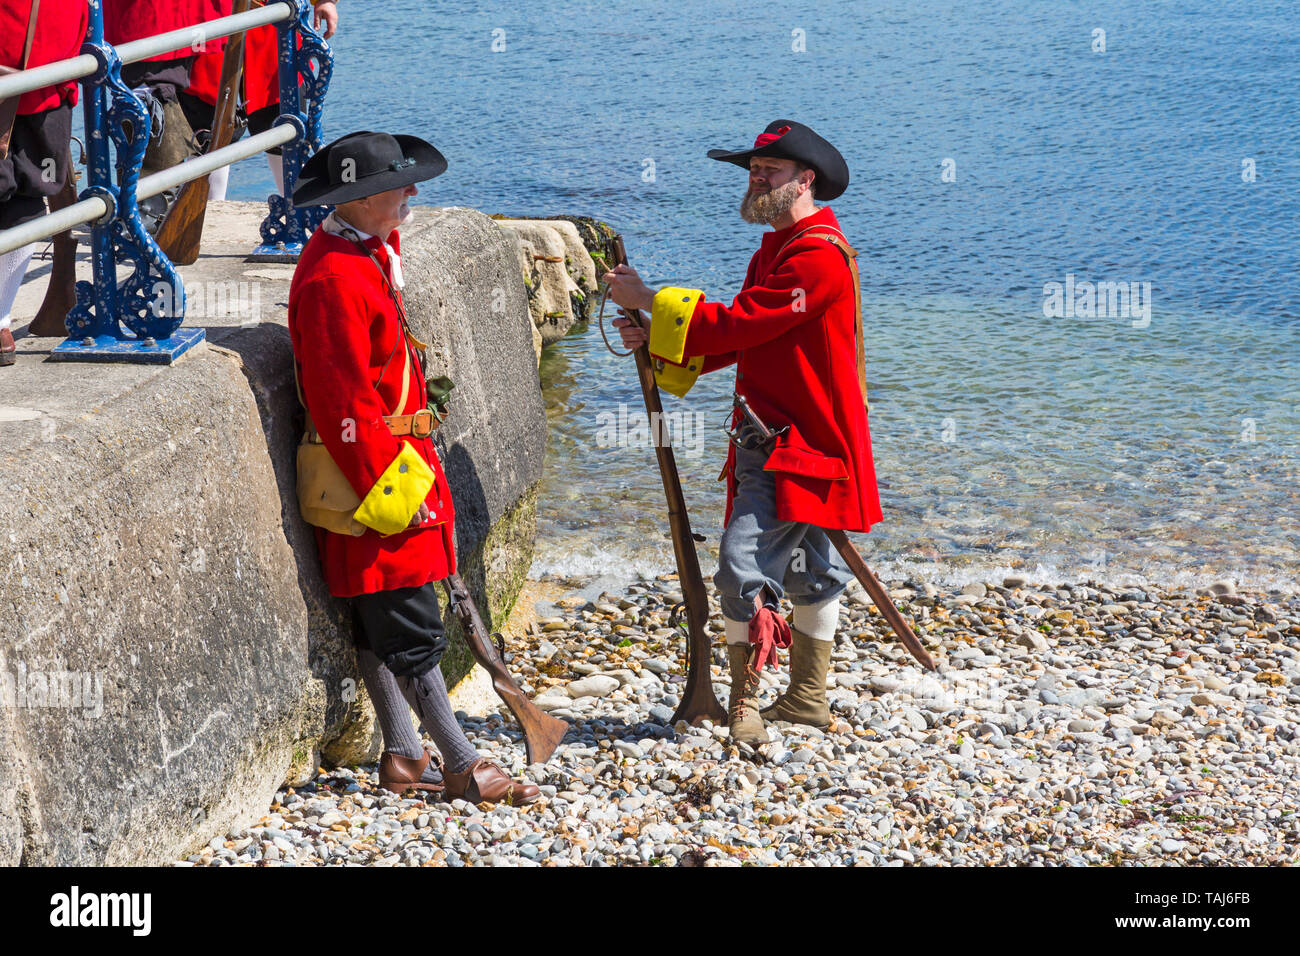 Swanage, Dorset, UK. 25th May 2019. Pirates arrive in Swanage for the Purbeck Pirate Festival on a warm sunny day.  Skirmish on Monkey Beach - reenactment battle of Redcoats against pirates. Credit: Carolyn Jenkins/Alamy Live News Stock Photo